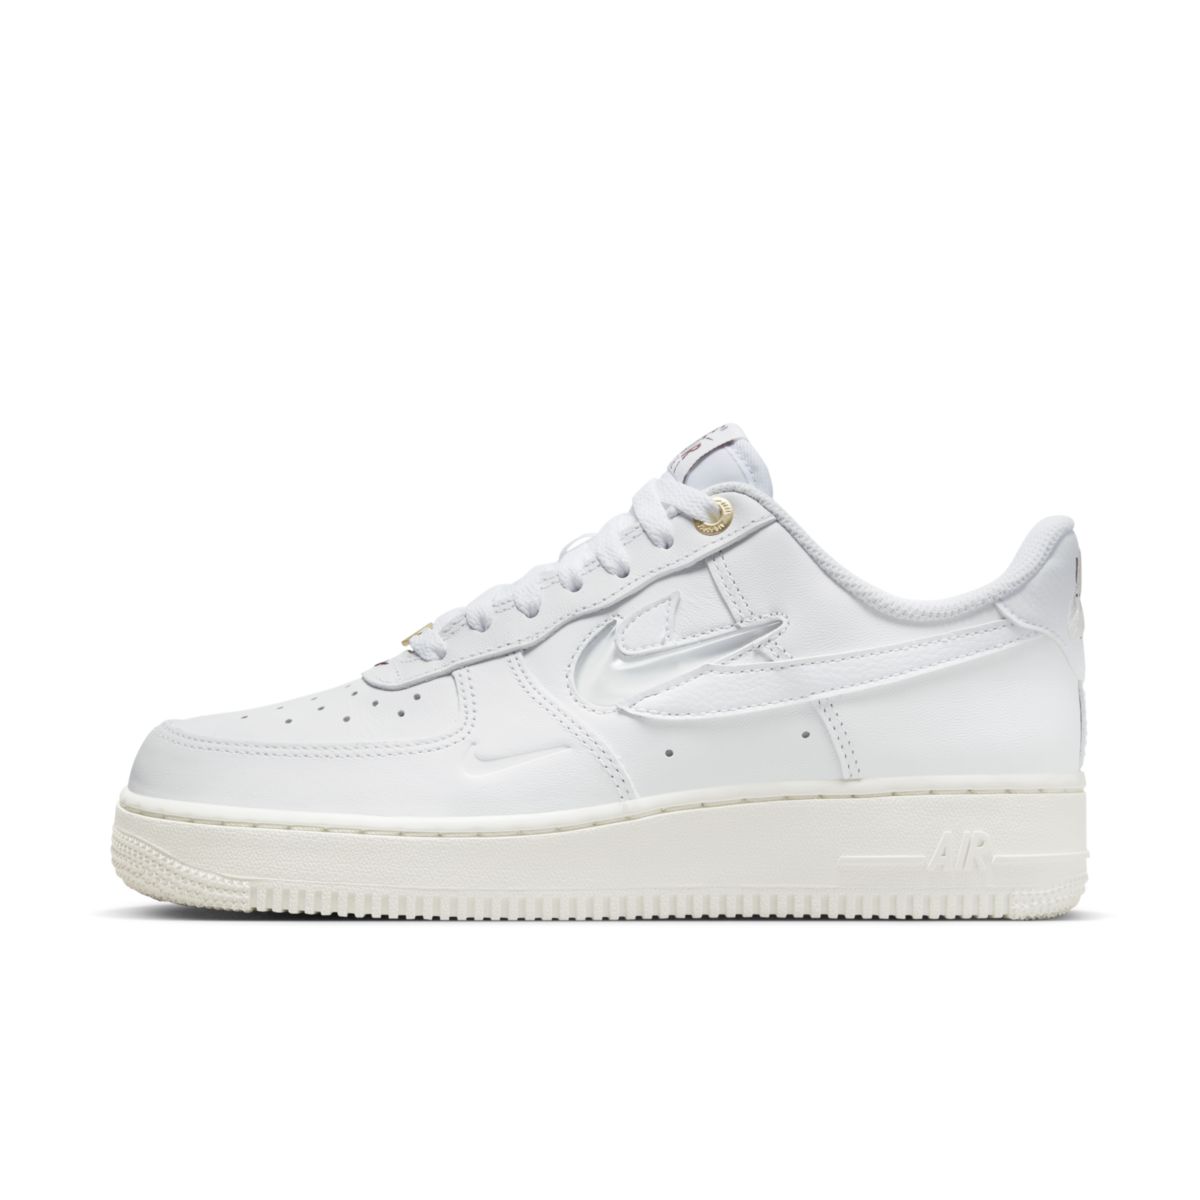 nike air force 1 low history of swoosh DZ5616-100 2